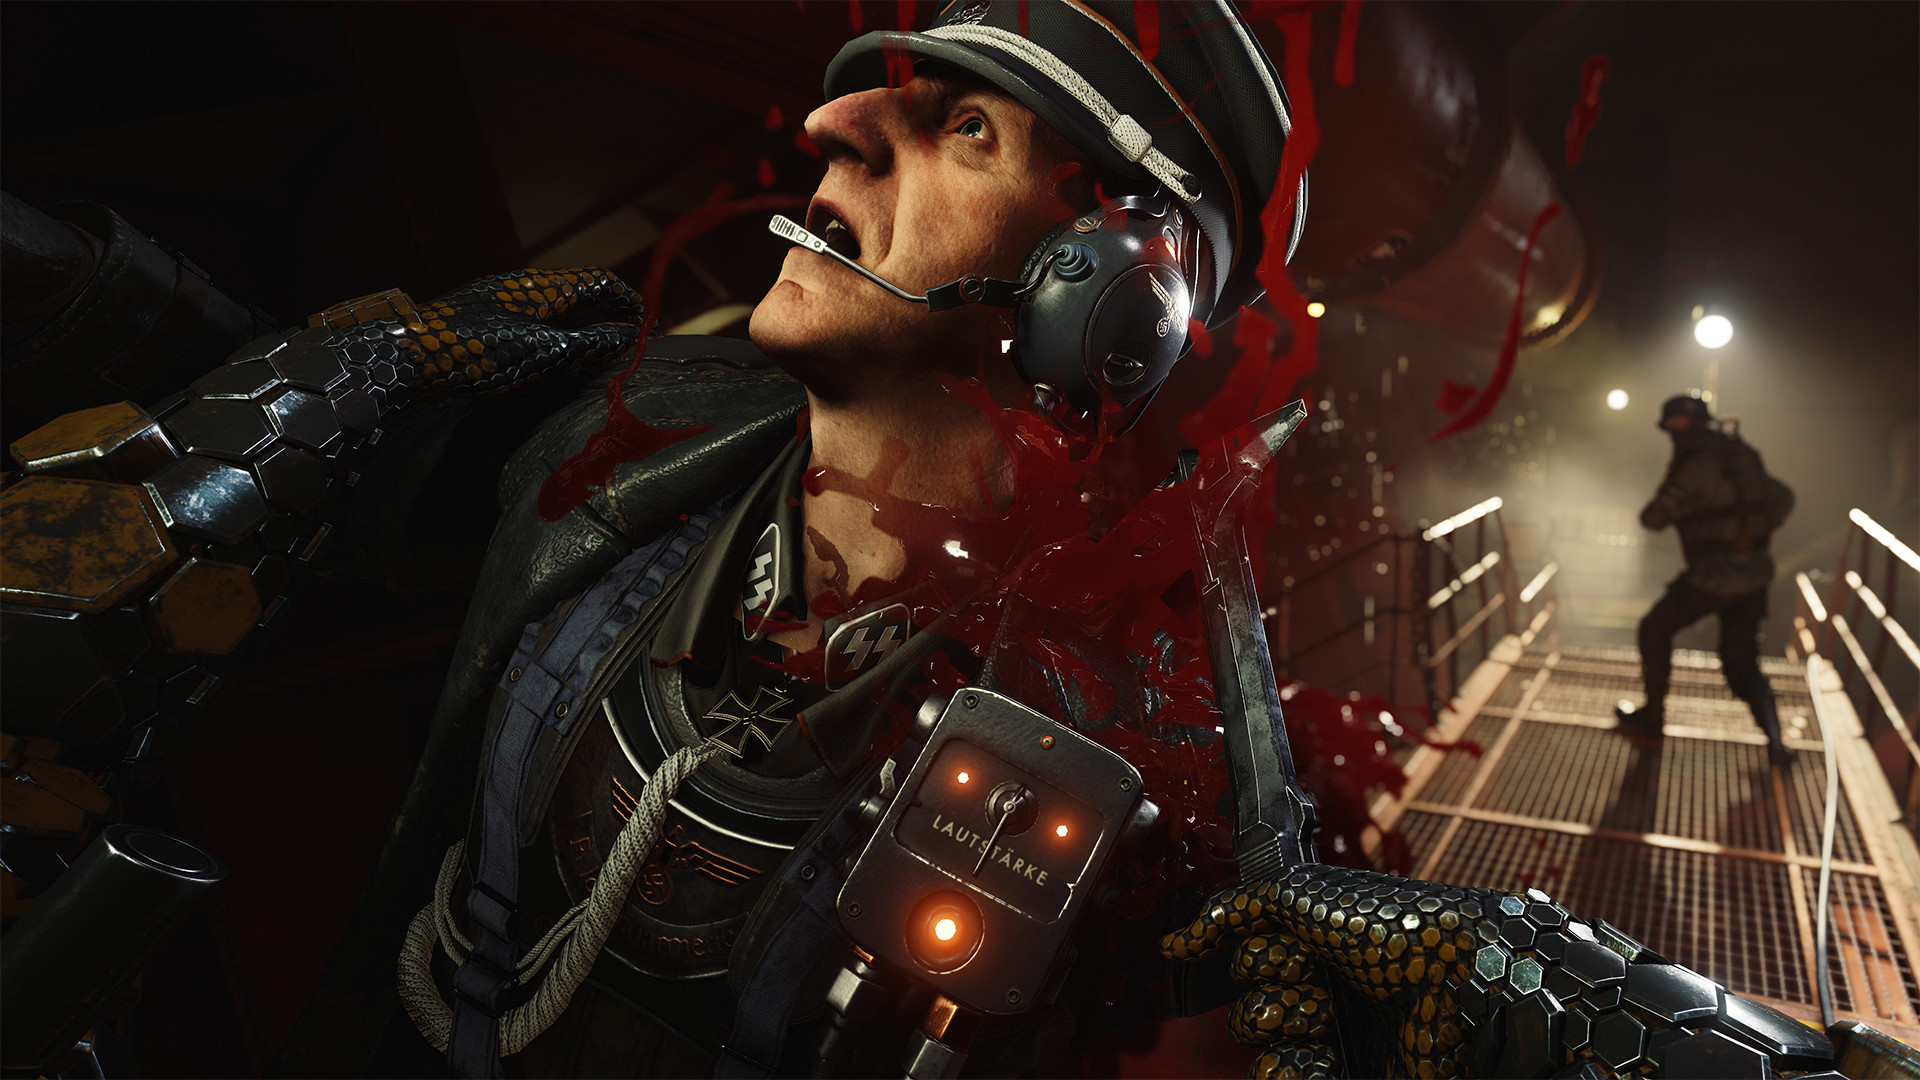 Wolfenstein II: The New Colossus + Update 10 + 5 DLCs Ss_be6b2824fd6796ebe8b5f78155a386f5c5178e6d.1920x1080